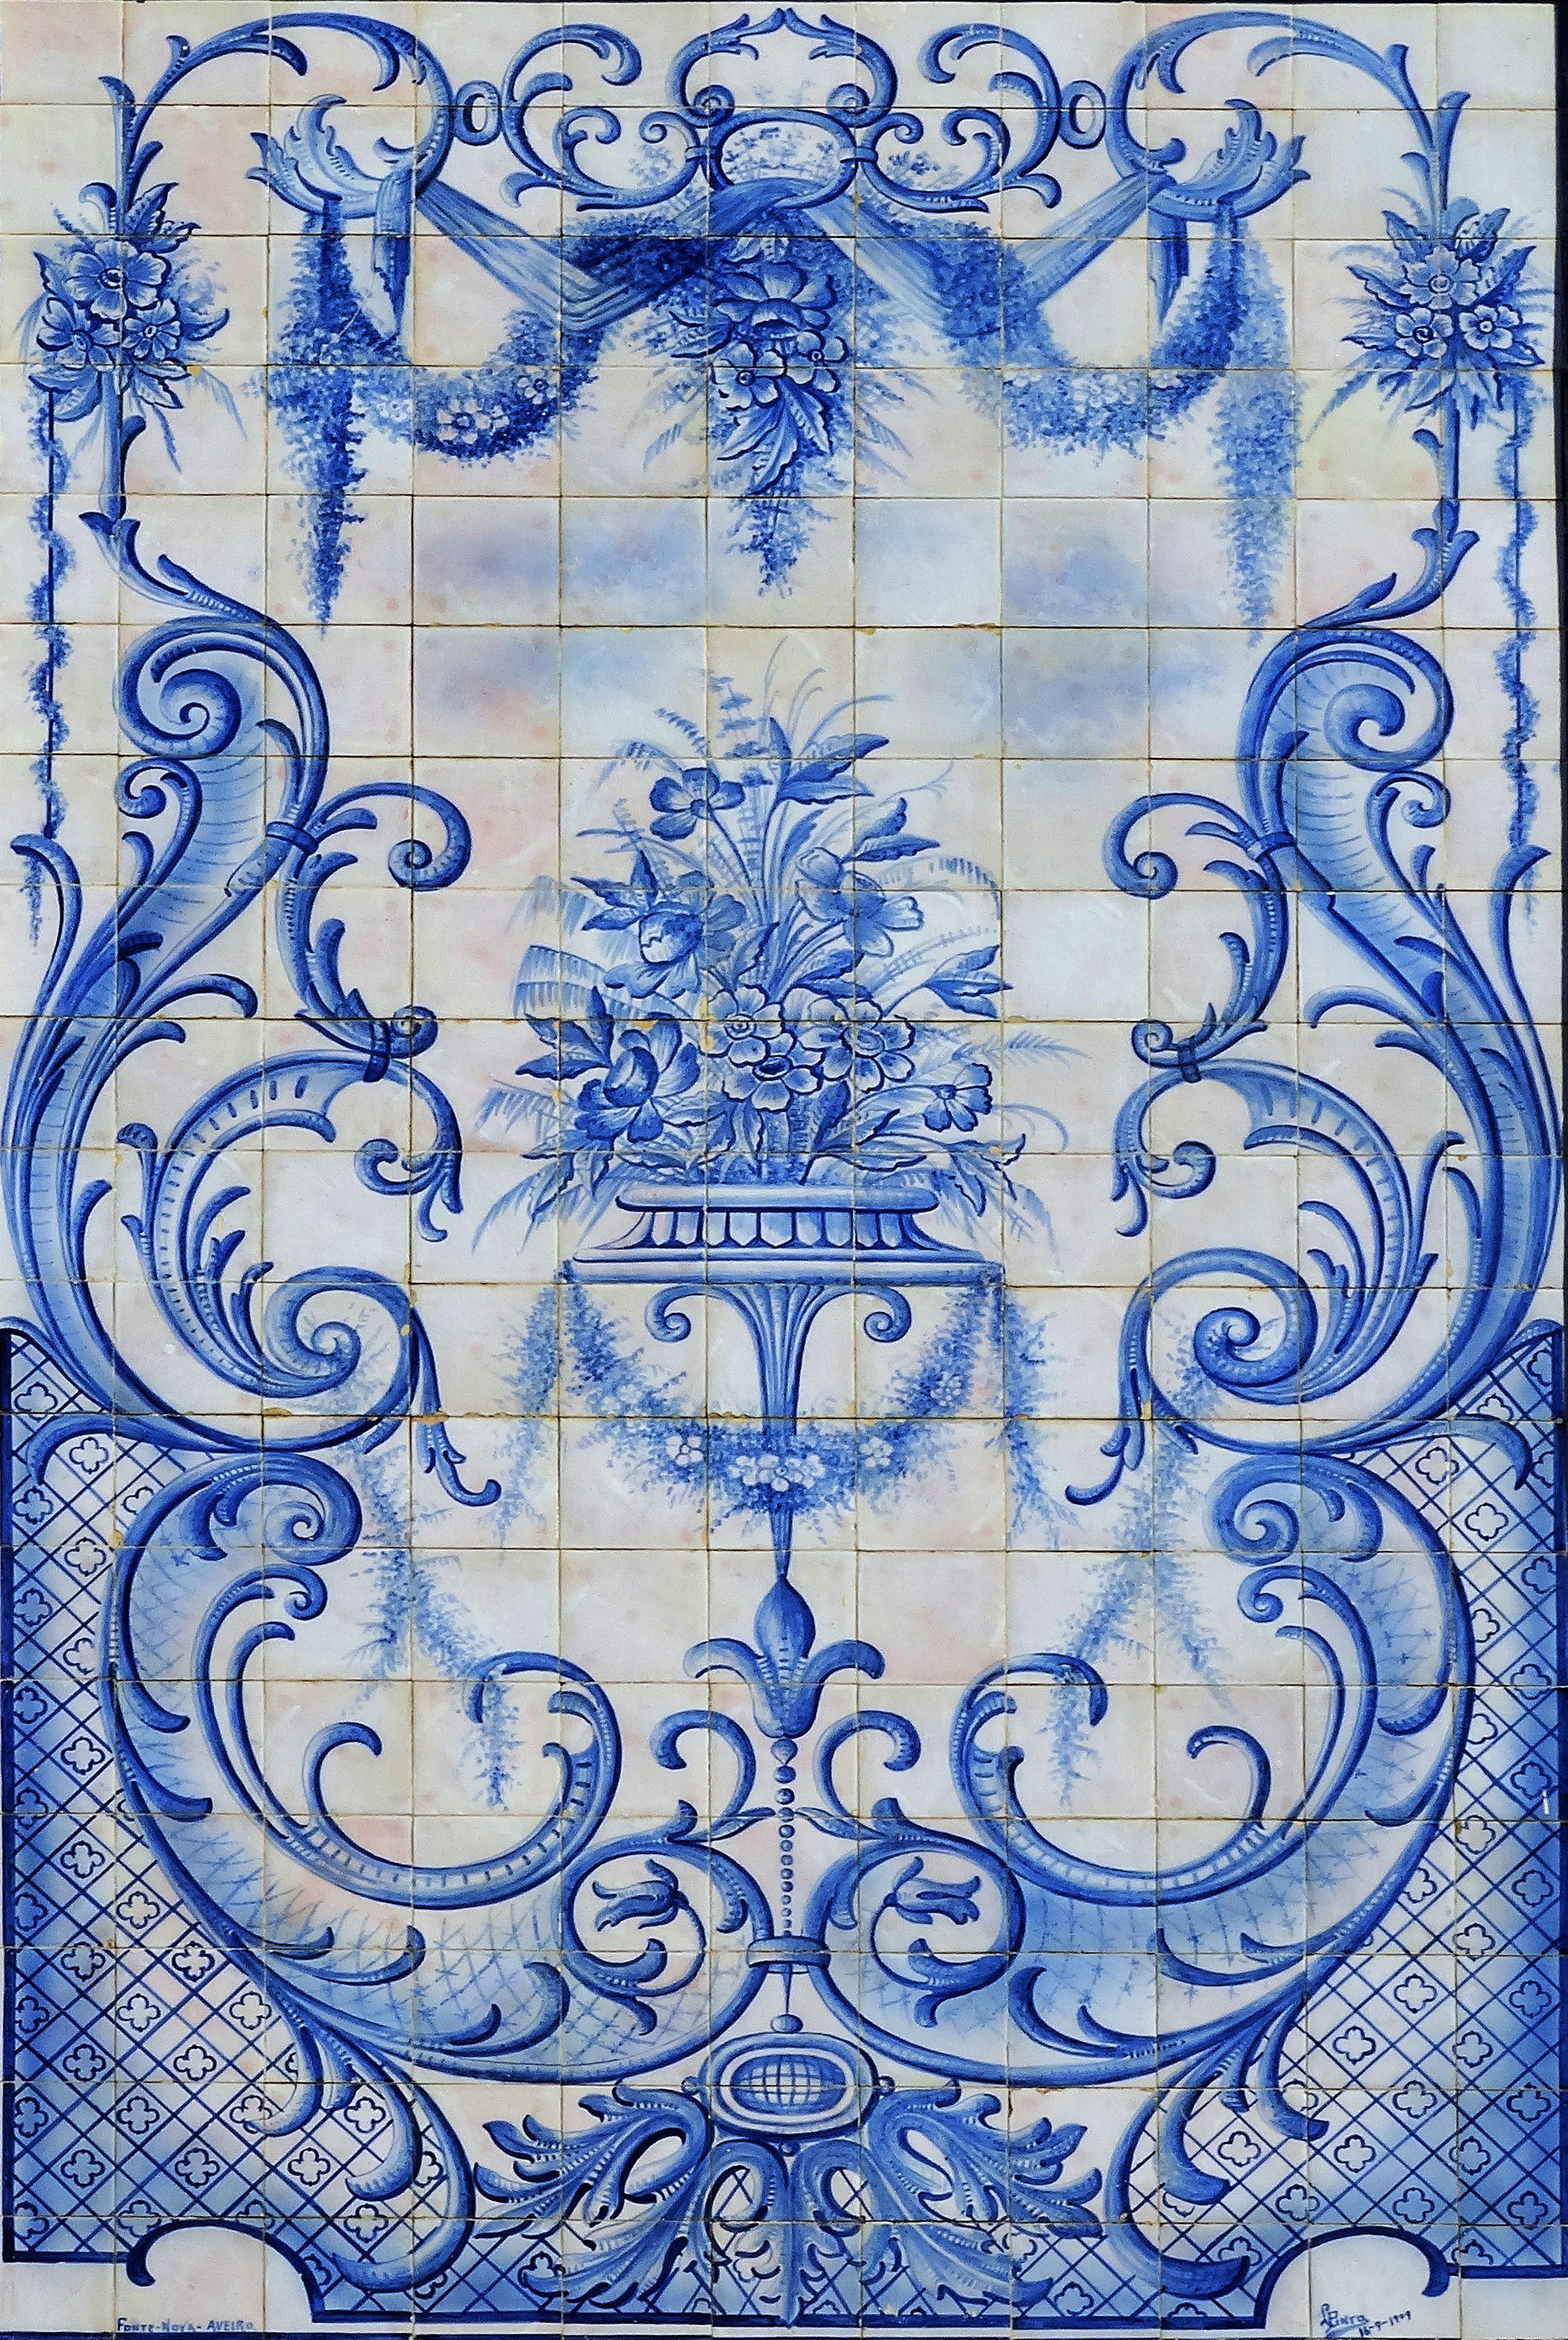 Painted tiles from Portugal.